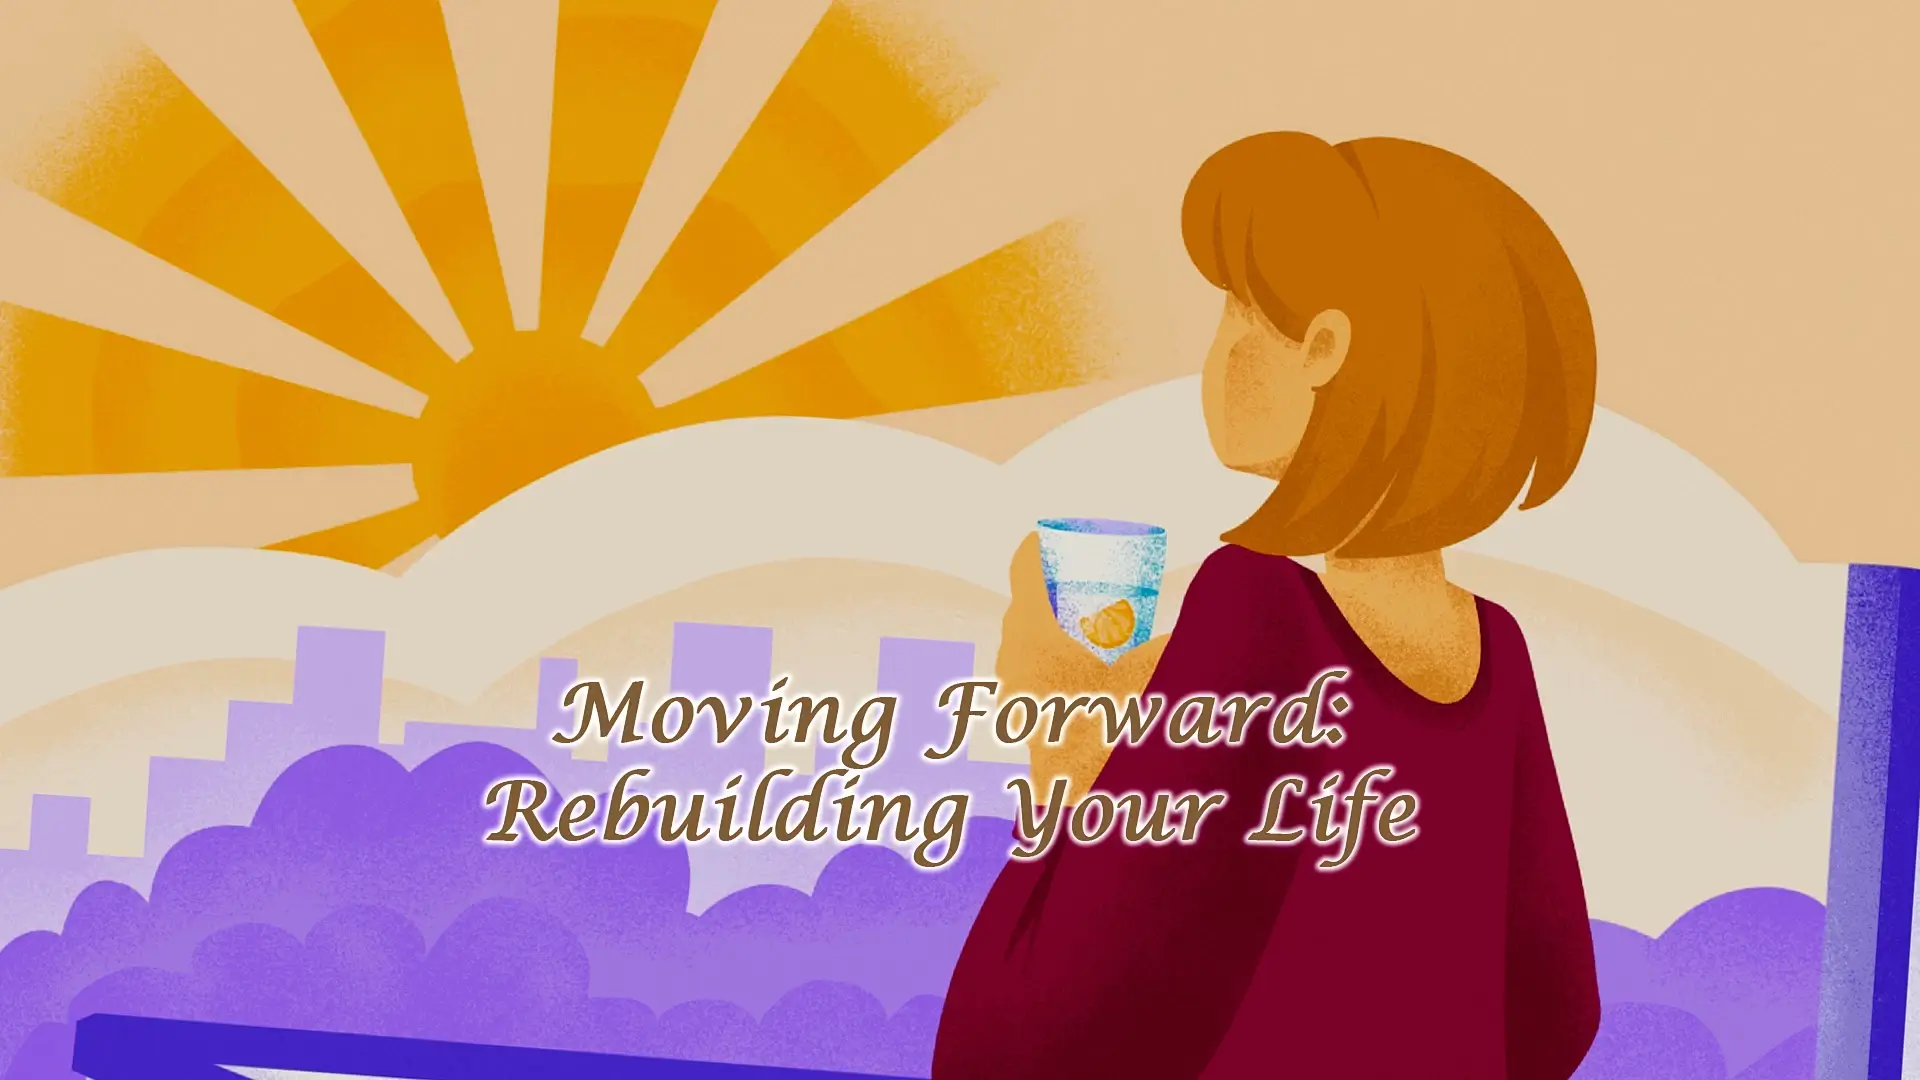 Moving Forward: Rebuilding Your Life